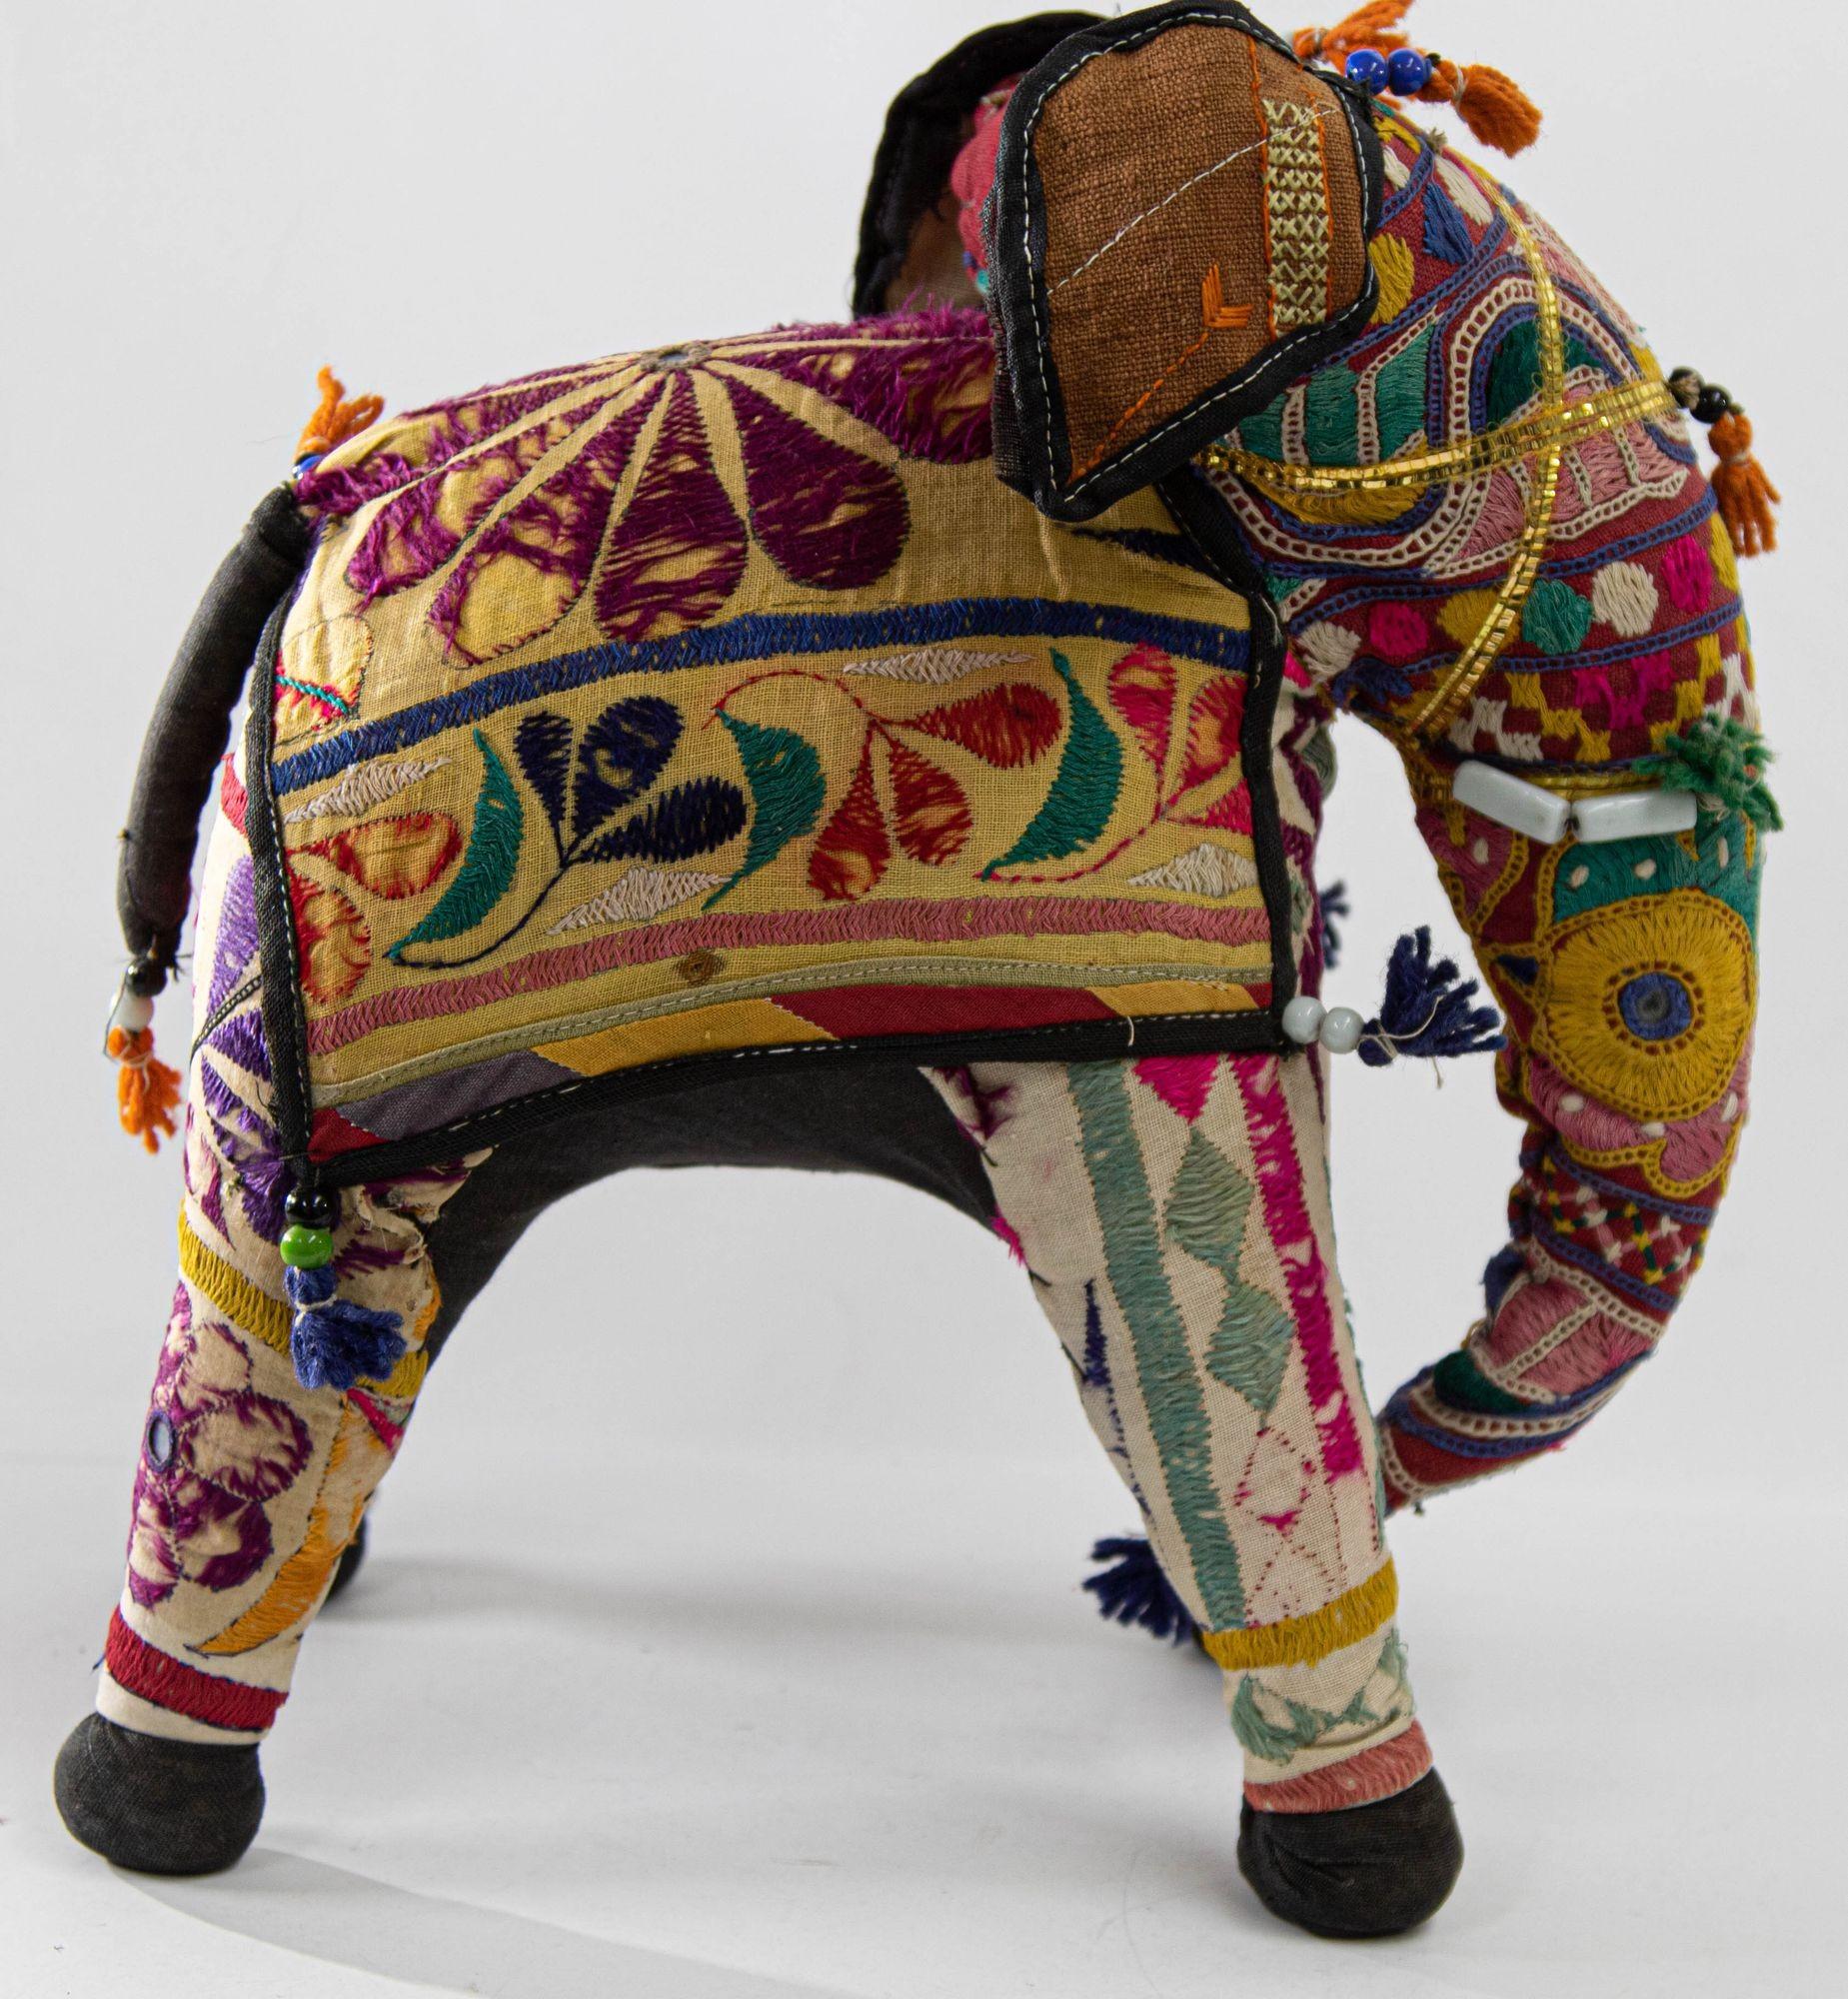 Vintage Handcrafted Stuffed Cotton Embroidered Ceremonial Elephant Toy Raj India For Sale 3